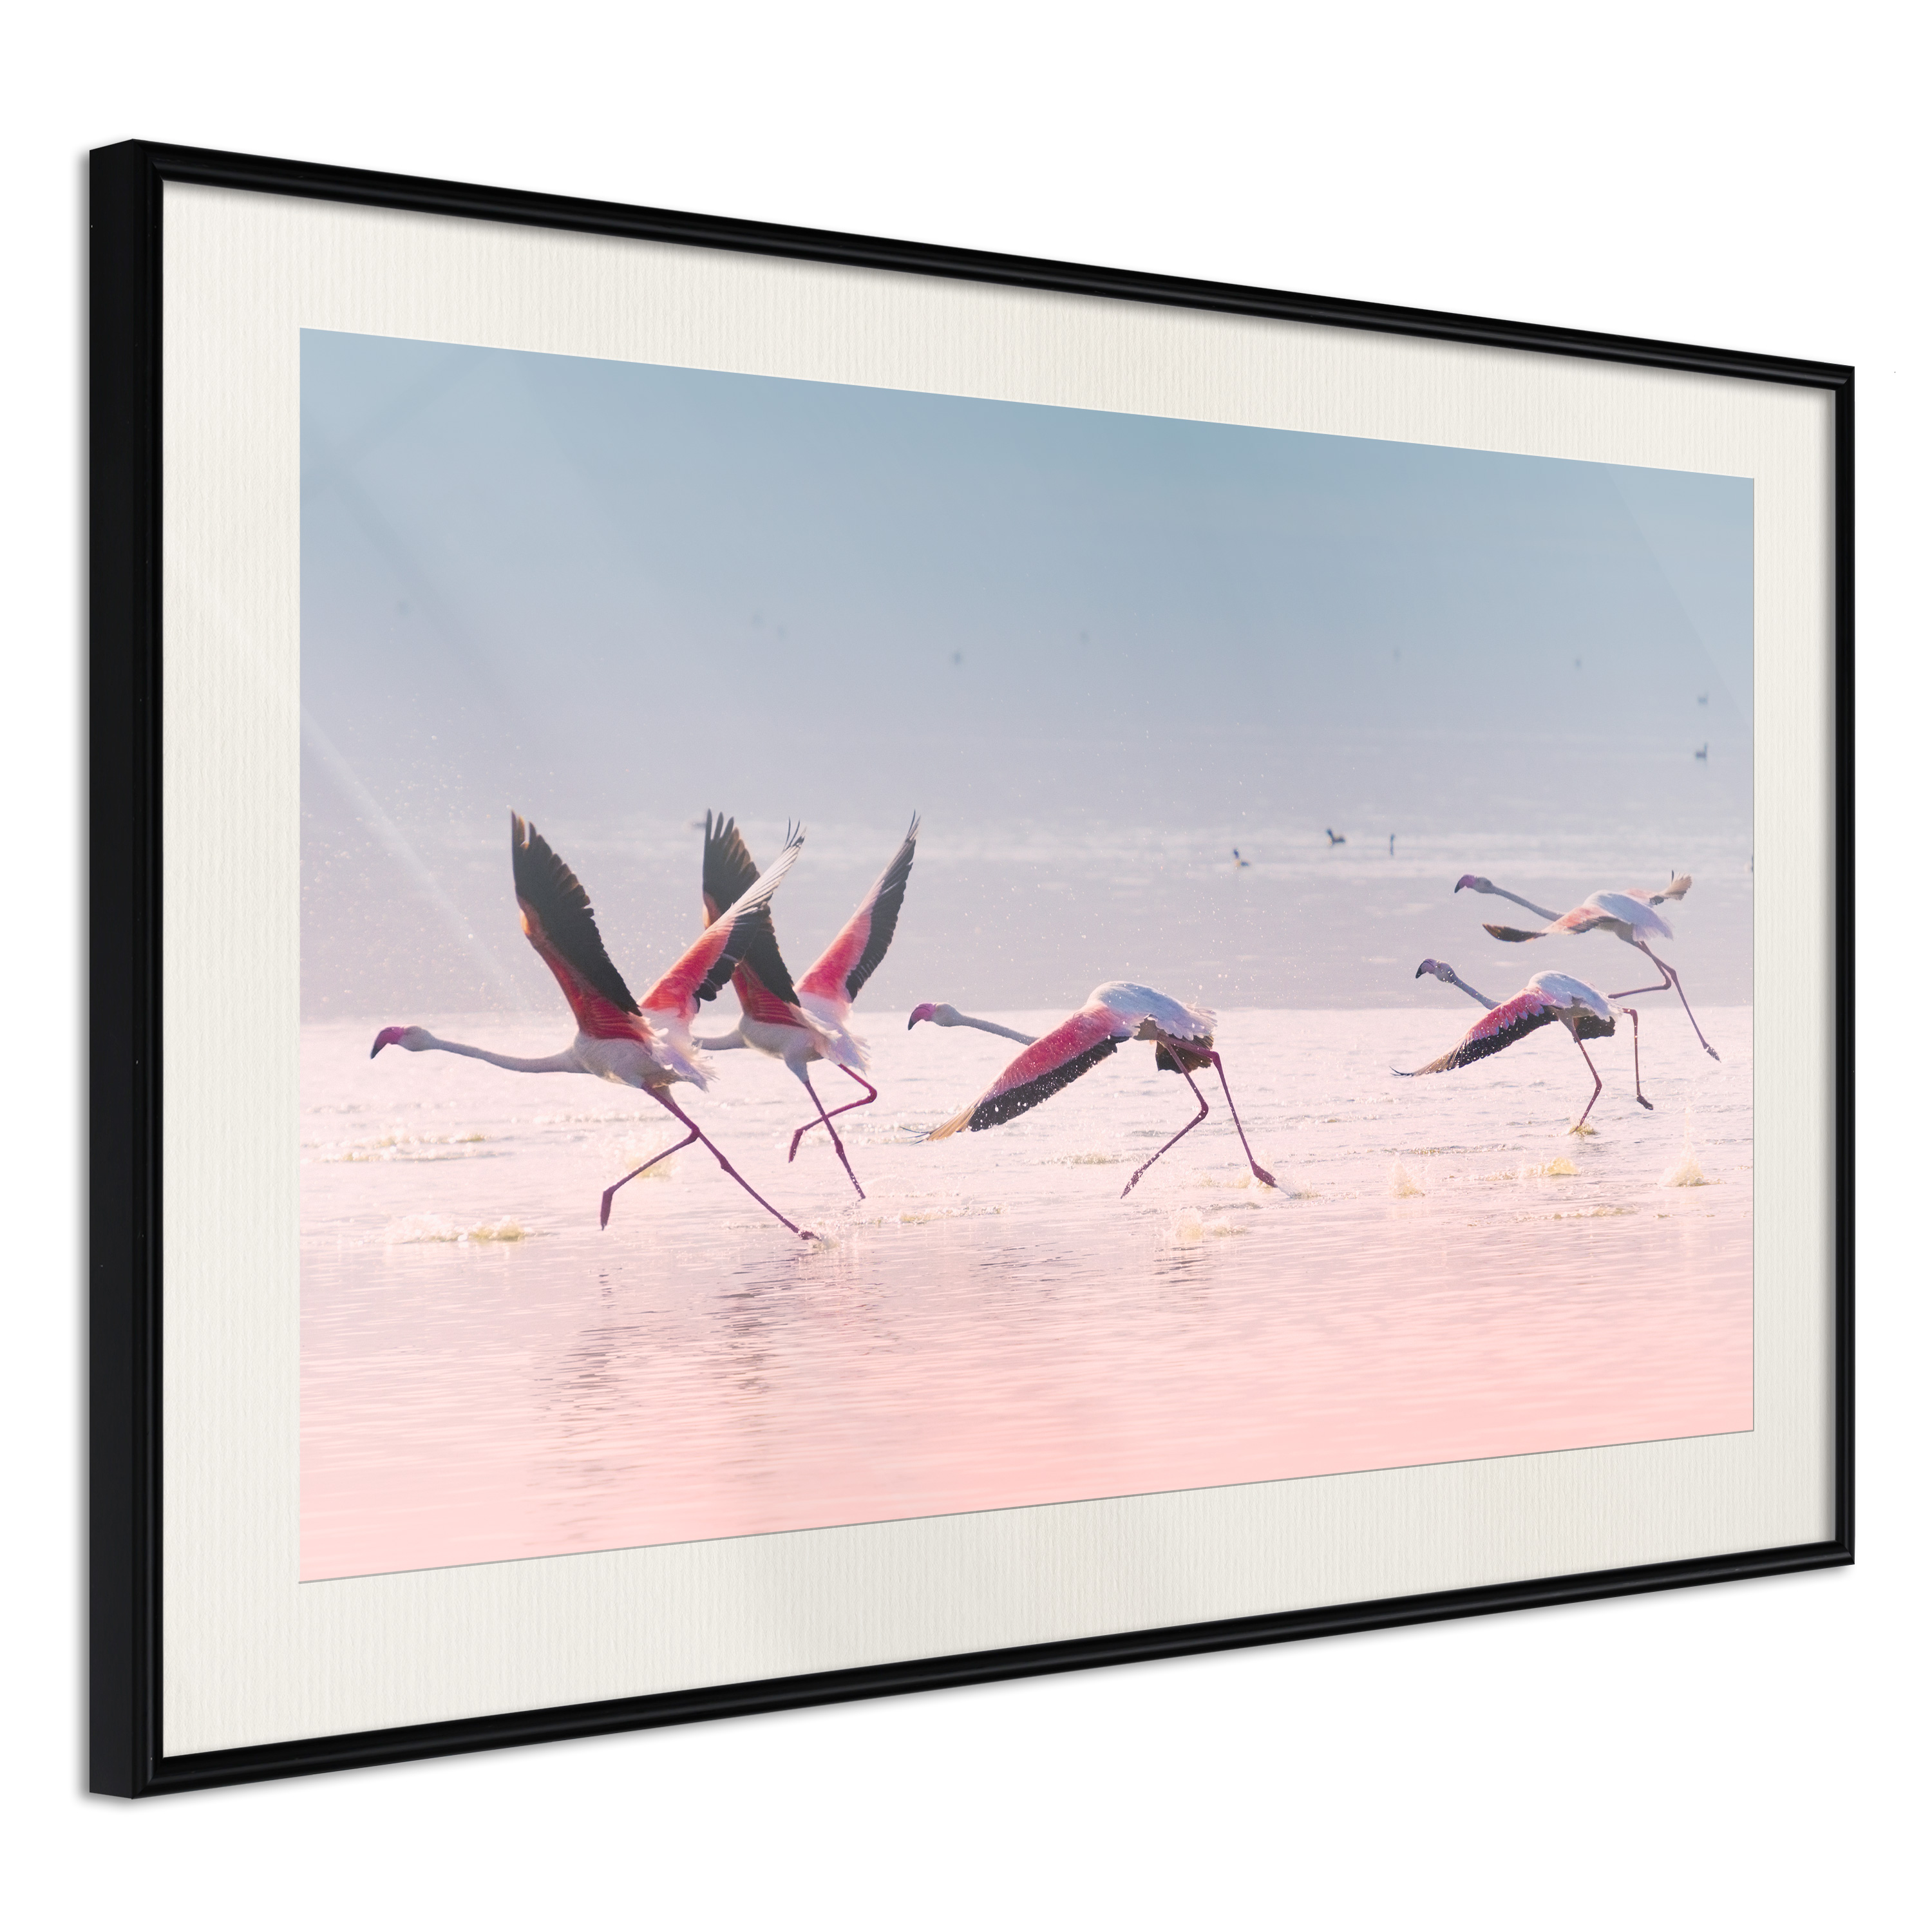 Poster - Flamingos Breaking into a Flight - 45x30